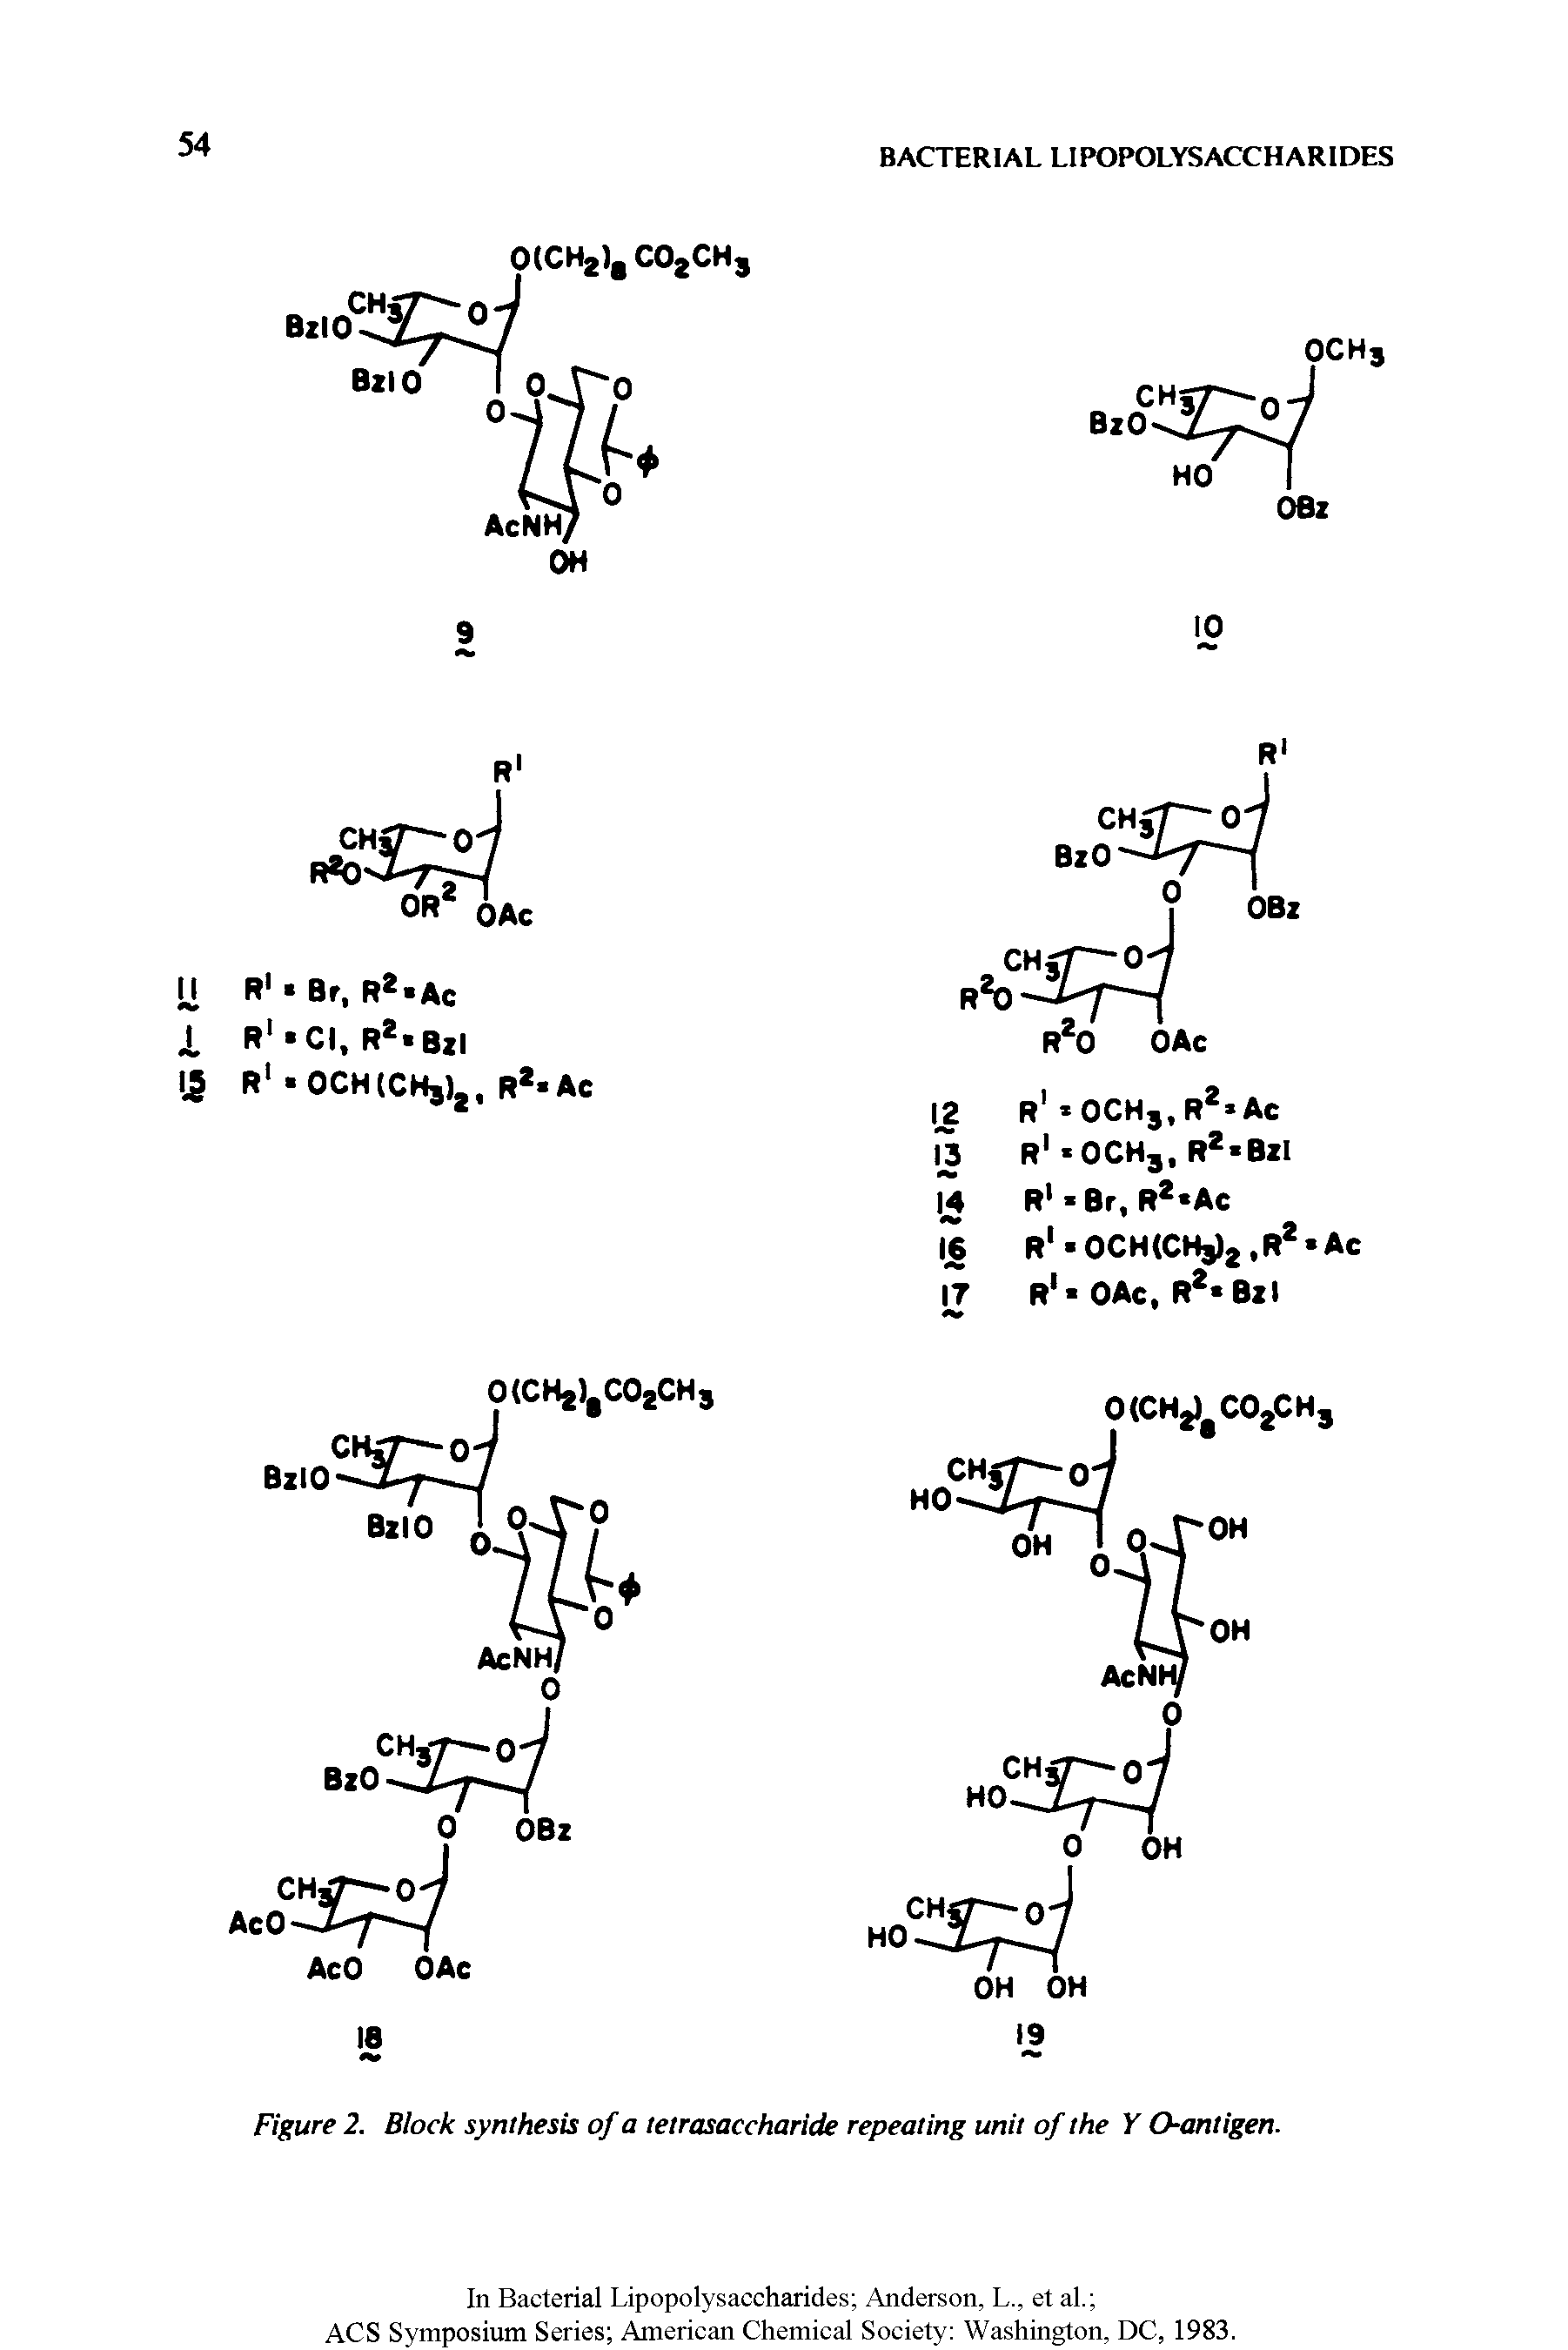 Figure 2. Block synthesis of a tetrasaccharide repeating unit of the Y O-antigen.